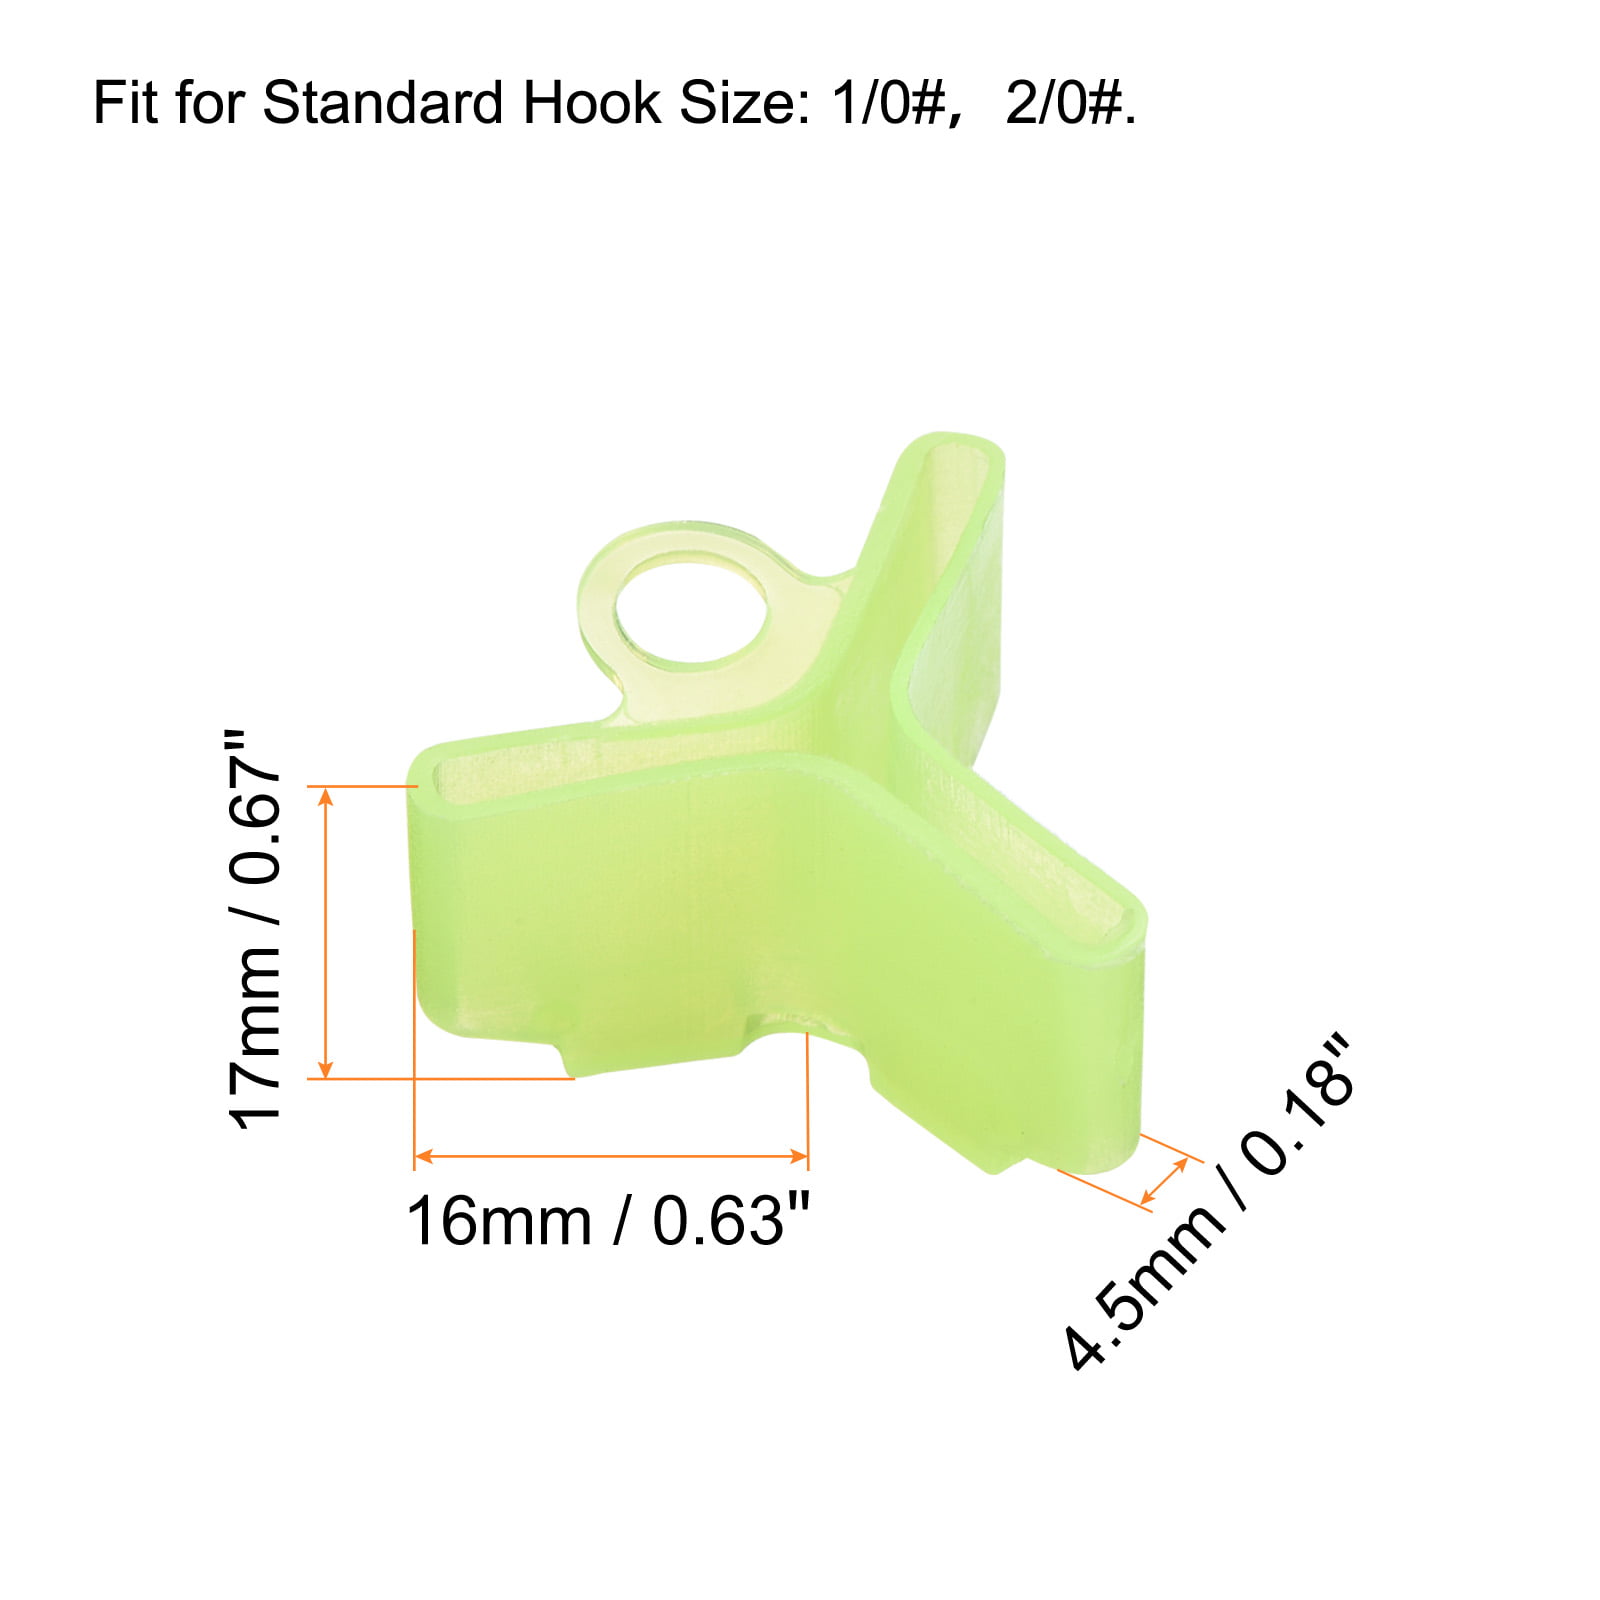 200/80pcs Fishing Hook Bonnets Treble Hook Covers for Standard Hook Sizes  #1/0~8,4 Sizes,Yellow and White Availale